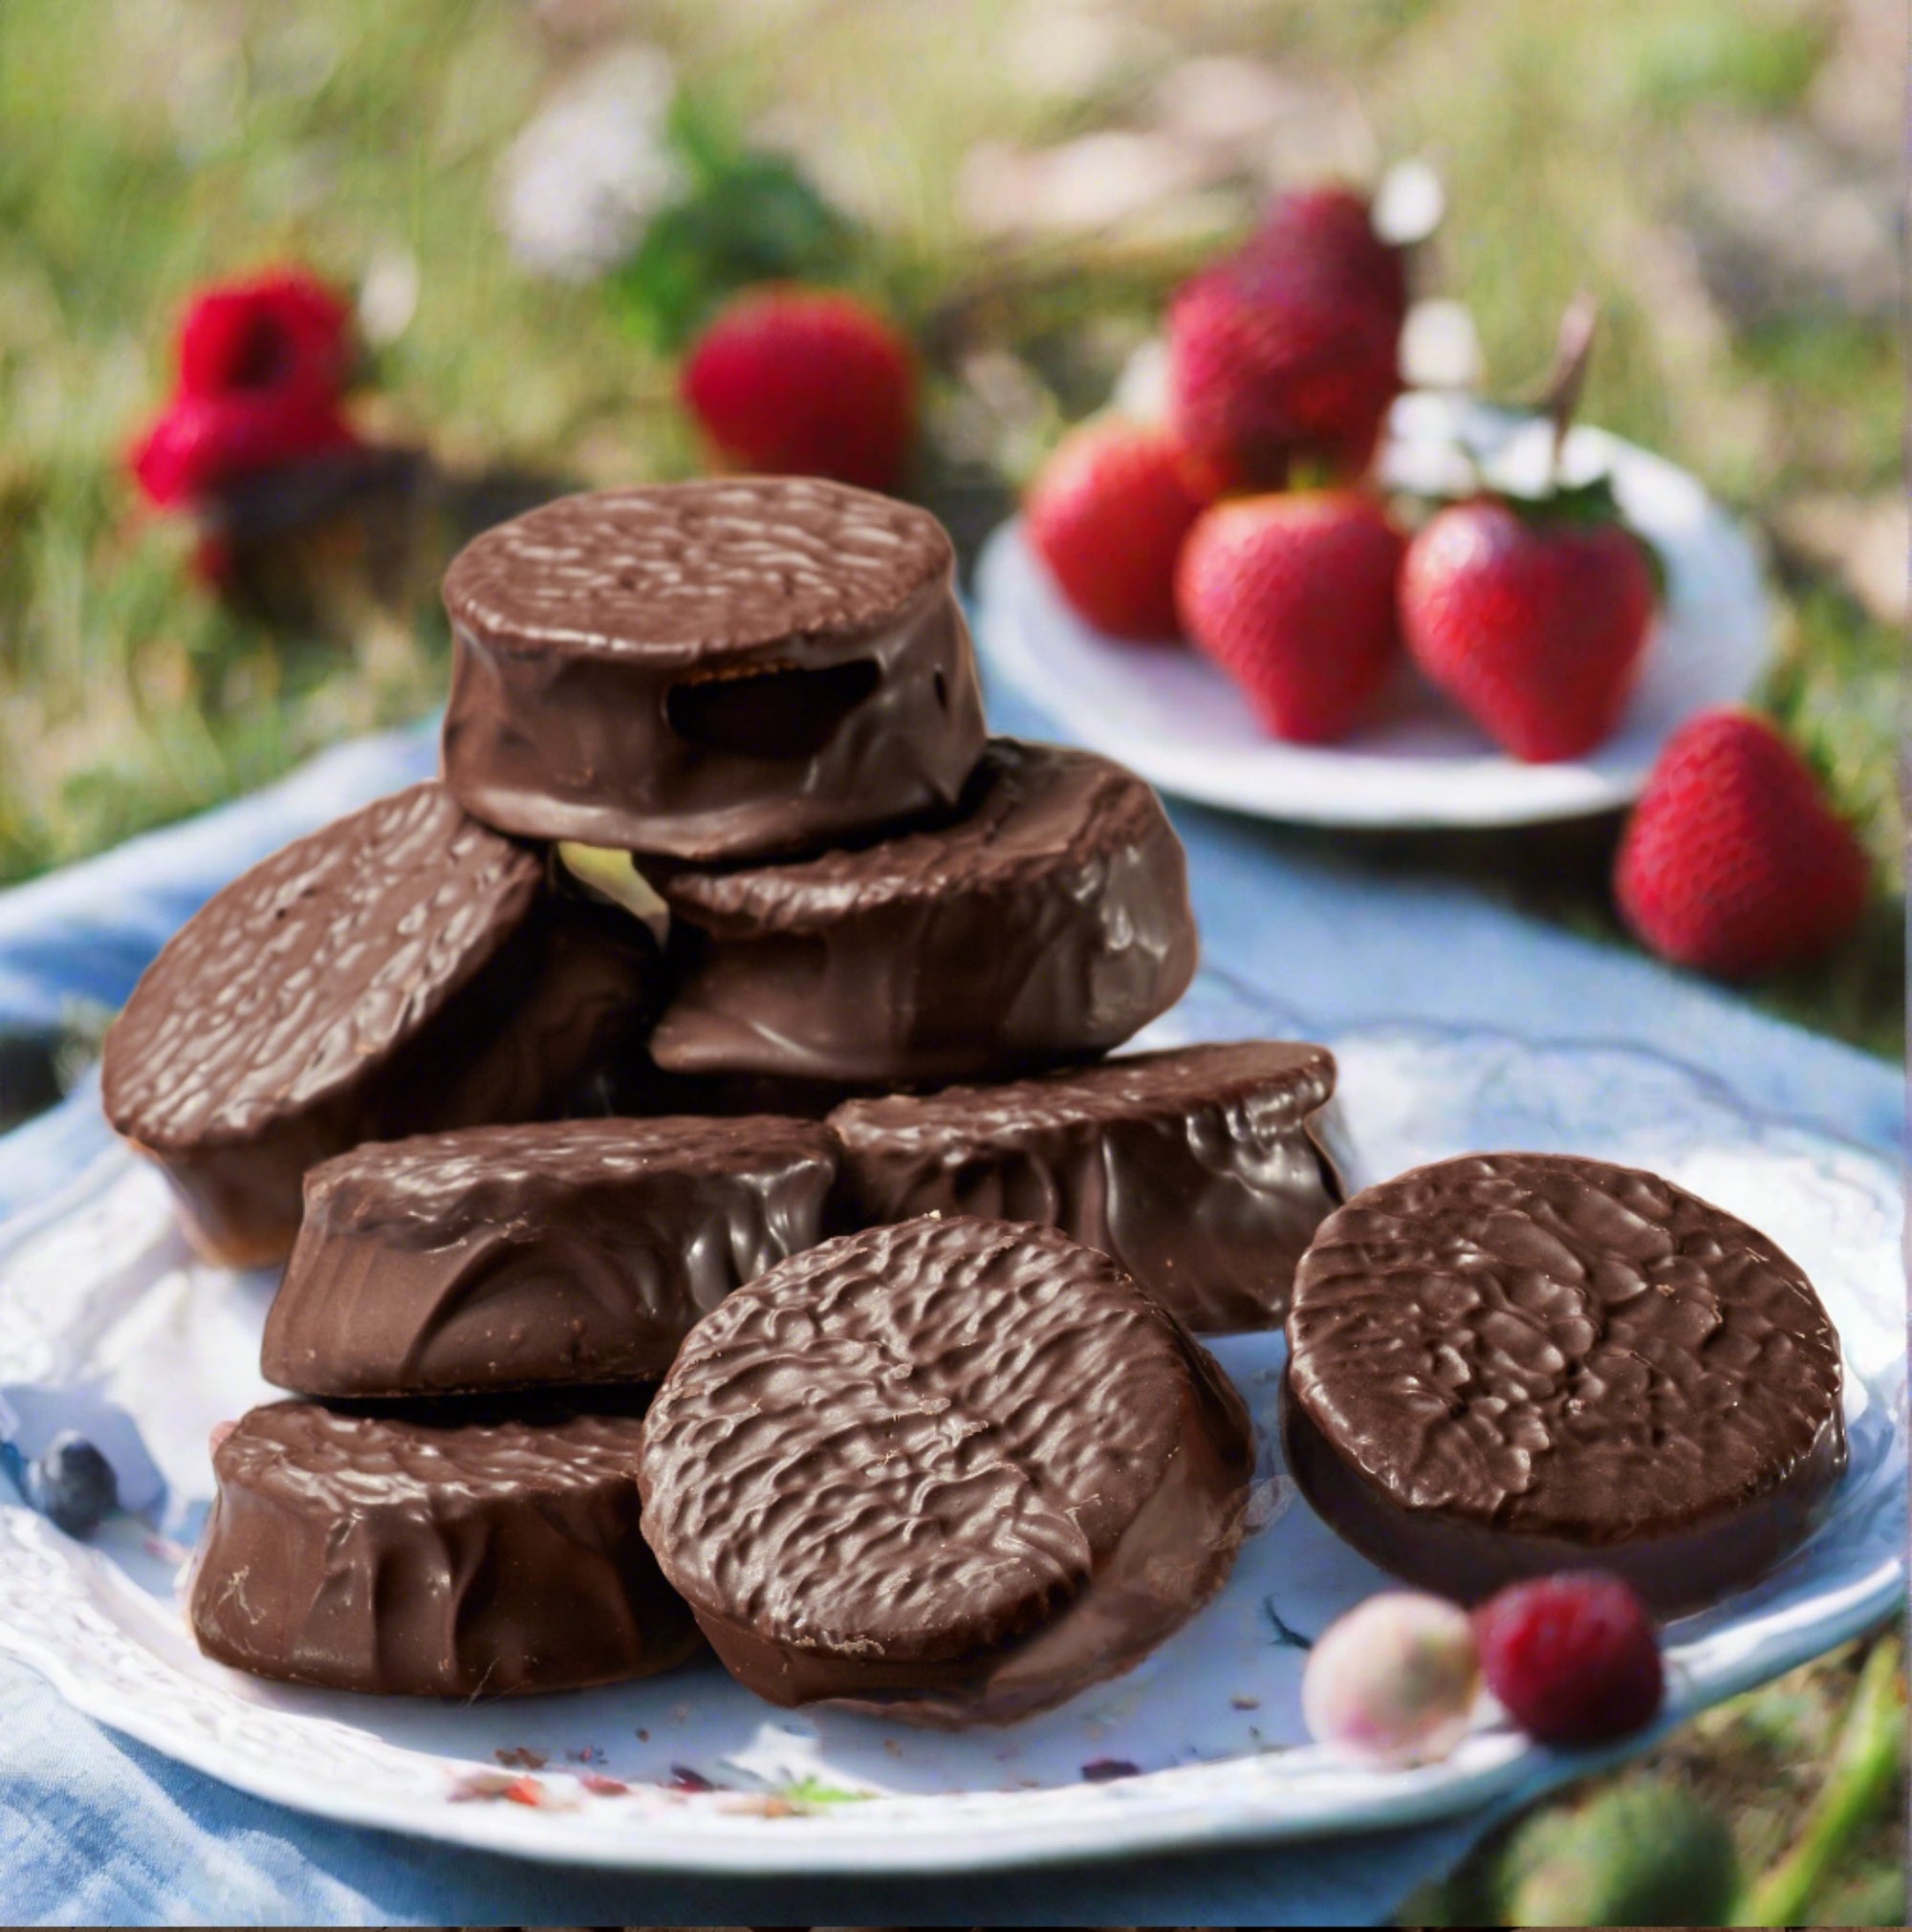 chocolate alfajores in a lovely picnic scene with strawberries